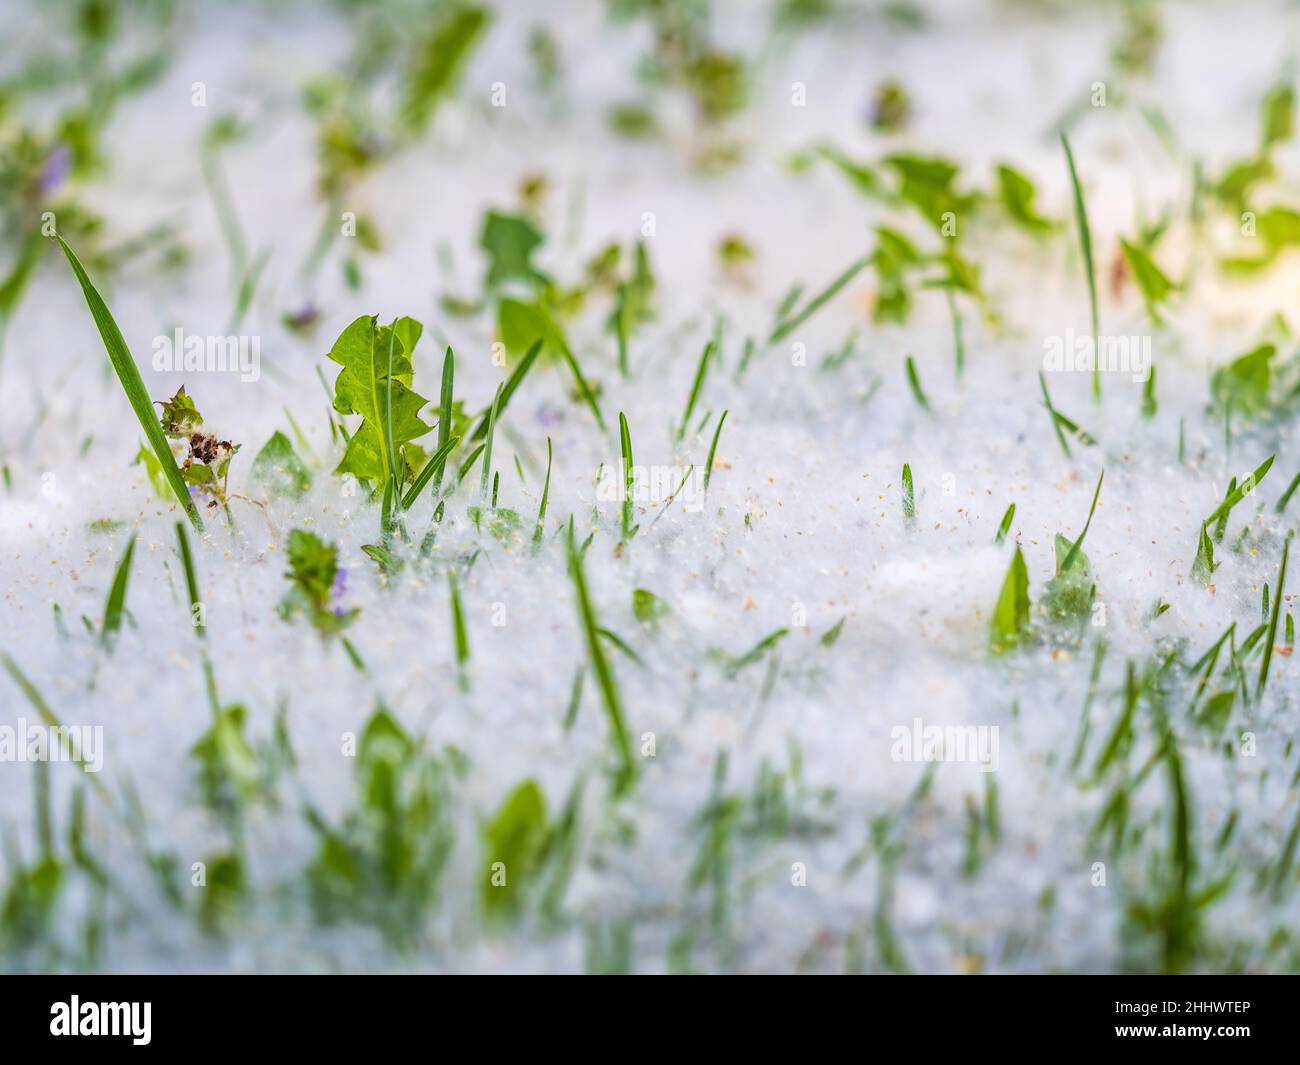 White Fluff On Green Image & Photo (Free Trial)